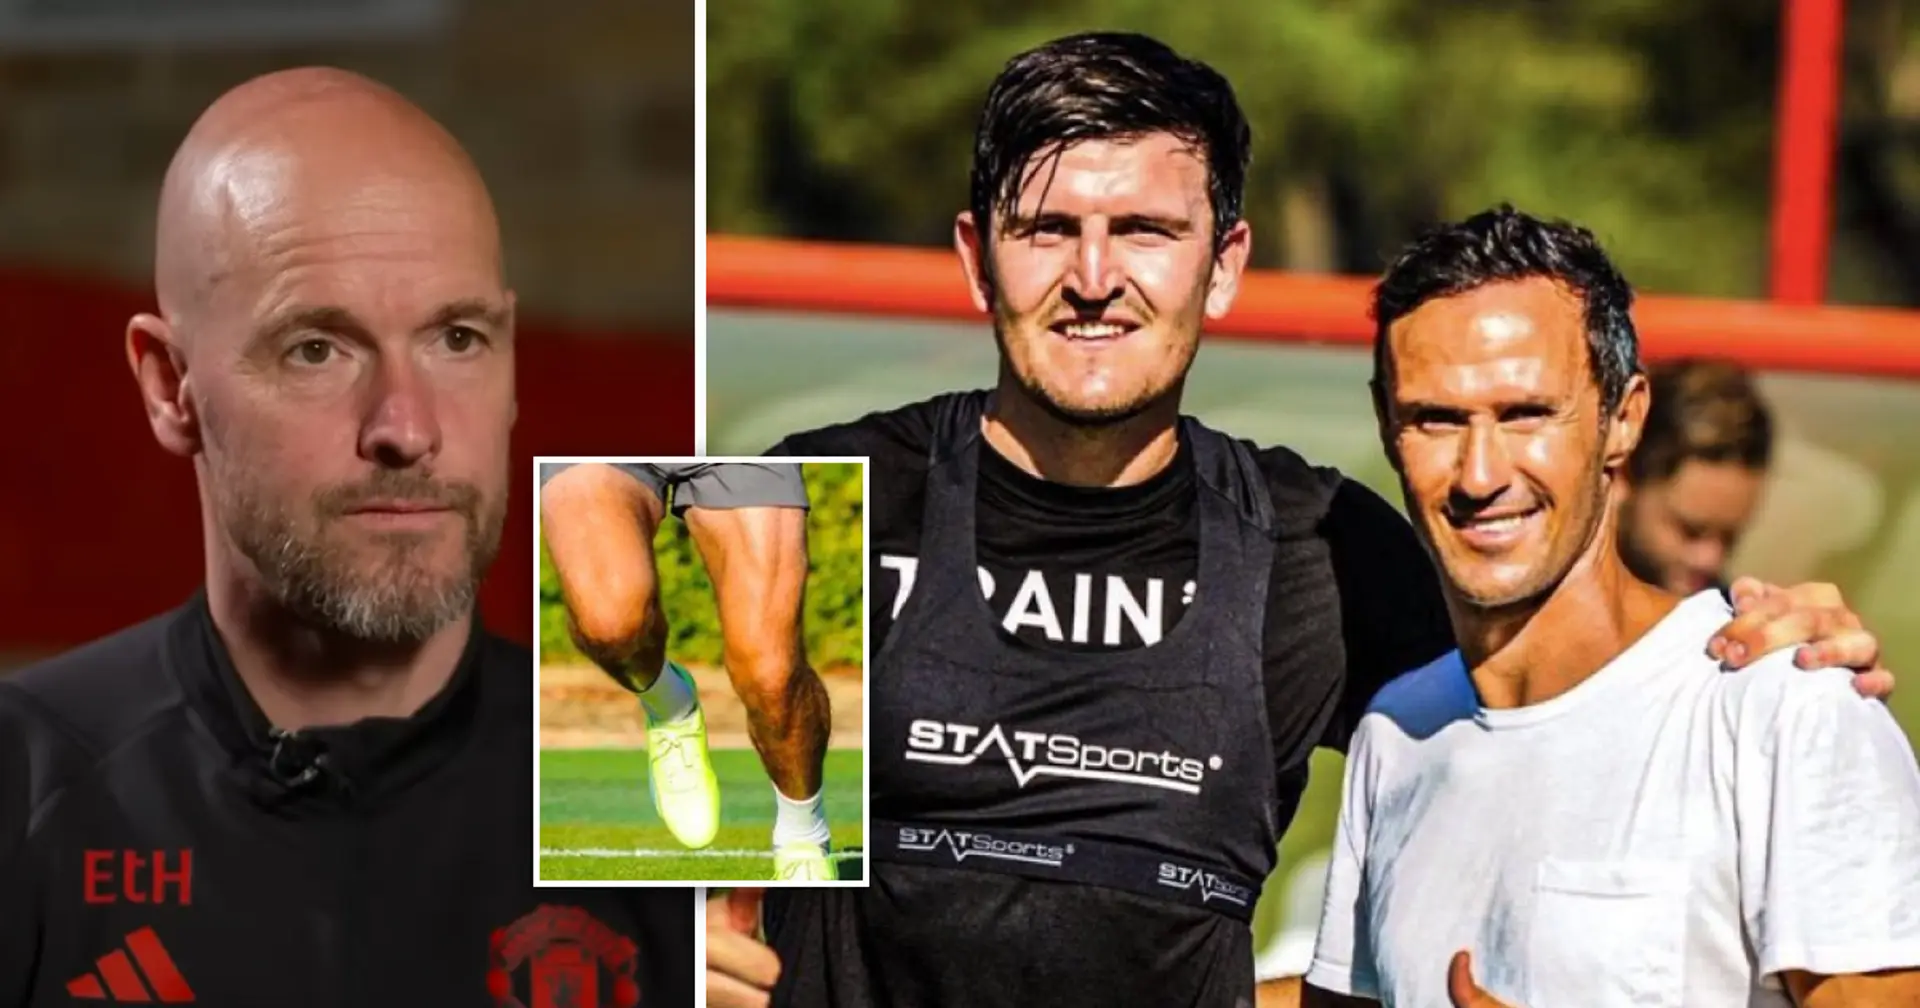 Harry Maguire trains 3 times a day in Portugal to impress Erik ten Hag, refuses to give up on Man United future